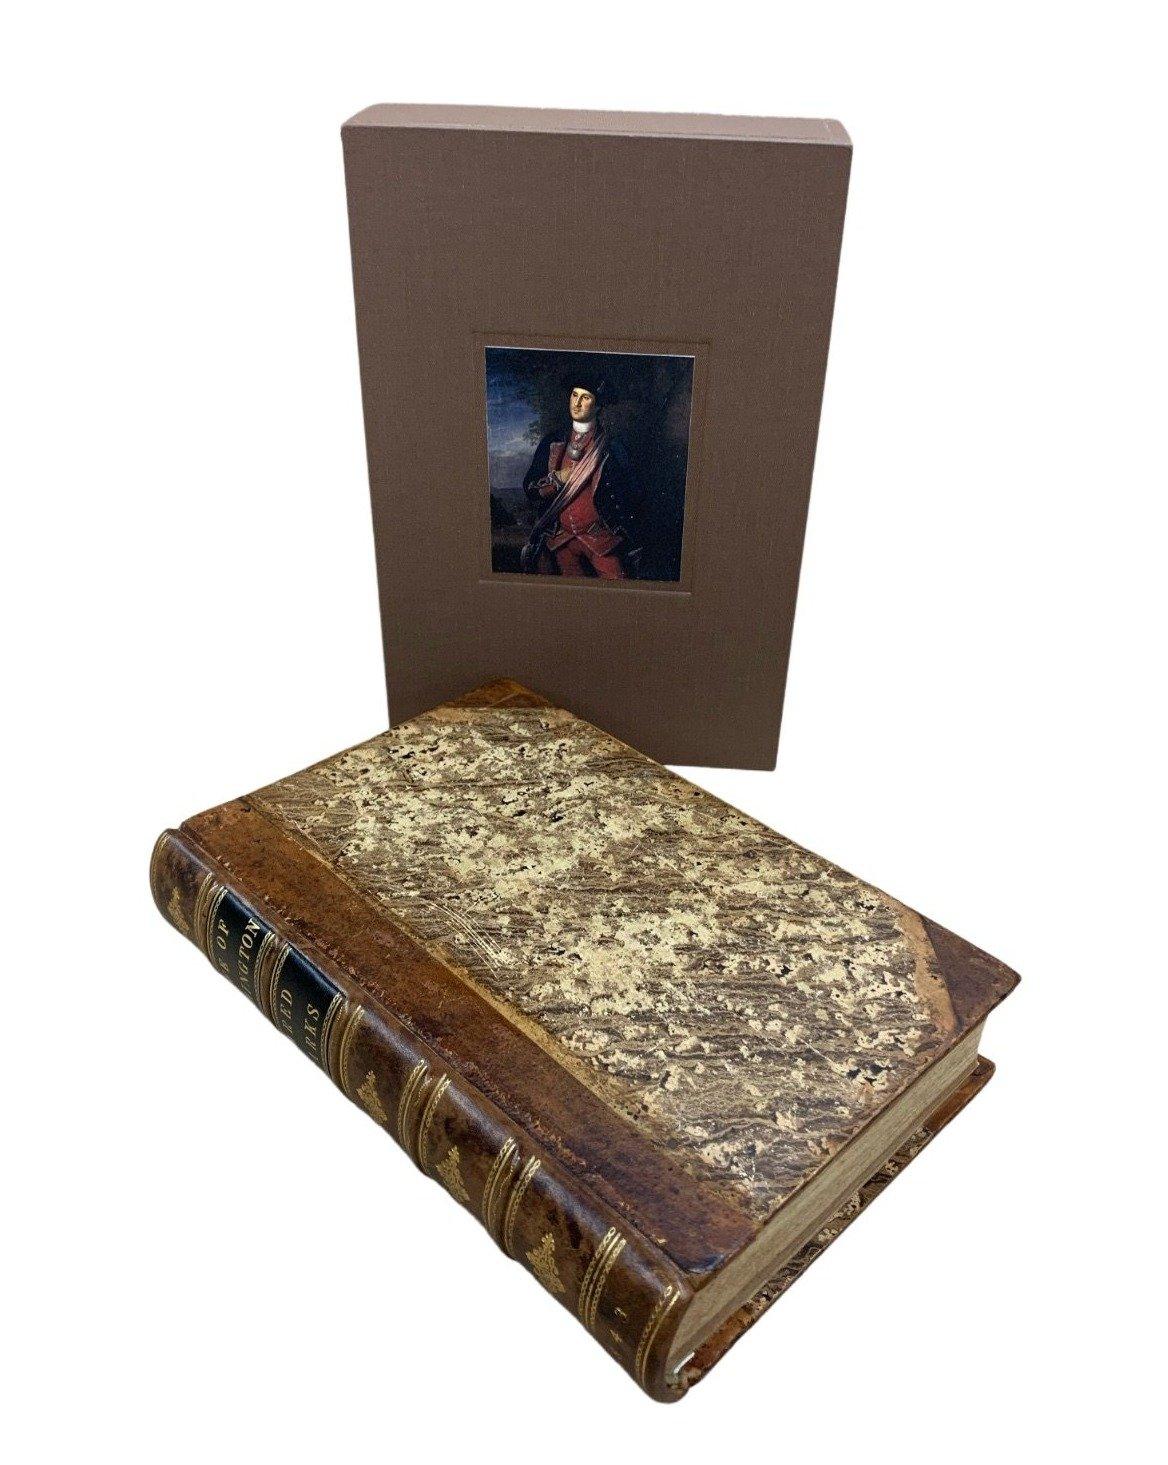 Sparks, Jared. The Life of George Washington. Boston: Tappan and Dennet, 1843. Later printing. Octavo. In contemporary boards, professionally rebacked, and tooled in period style, with new archival brown cloth slipcase.

Presented is a later 1843